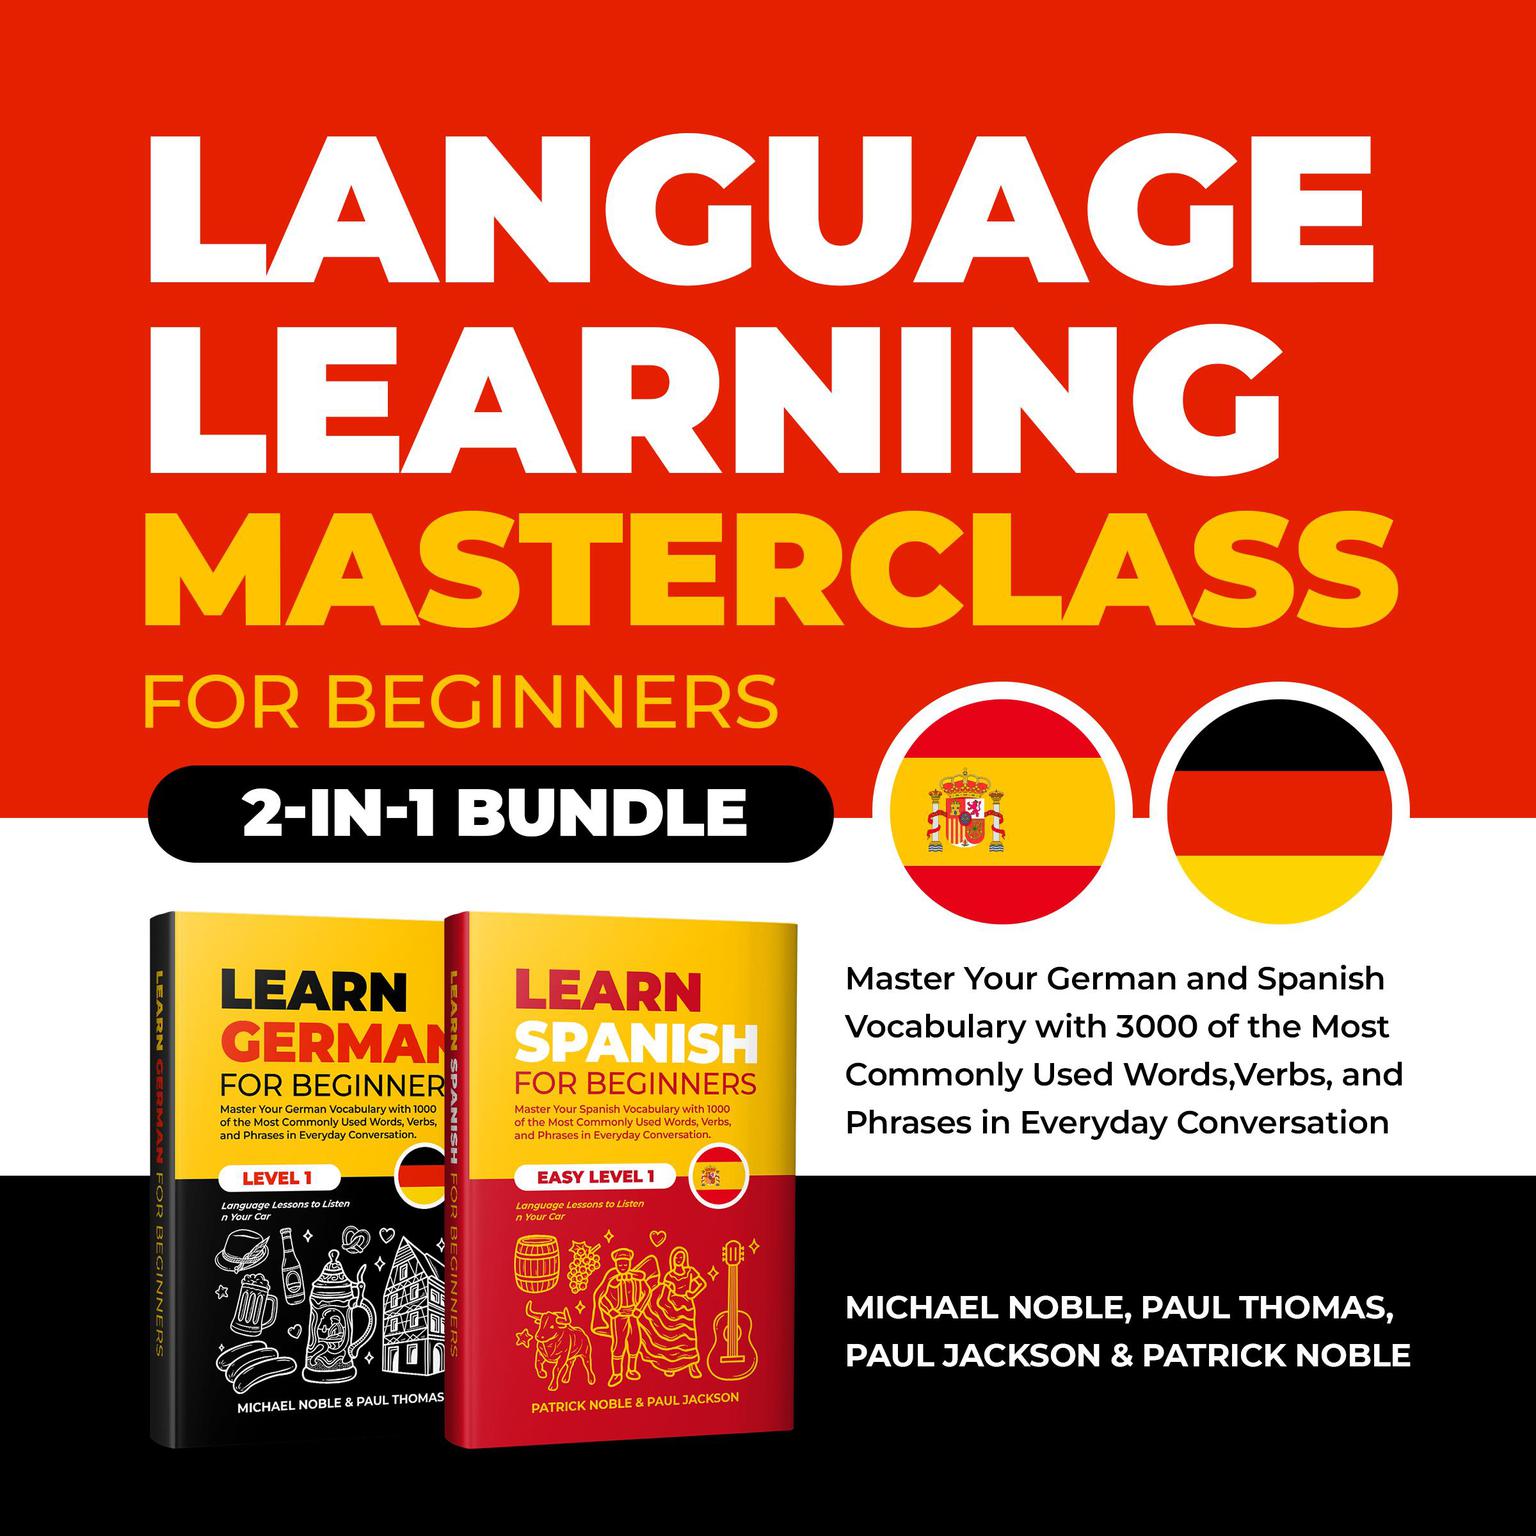 Language Learning Masterclass for Beginners (2-in-1 Bundle): Master Your German and Spanish Vocabulary with 3000 of the Most Commonly Used Words, Verbs and Phrases in Everyday Conversation Audiobook, by Paul Thomas